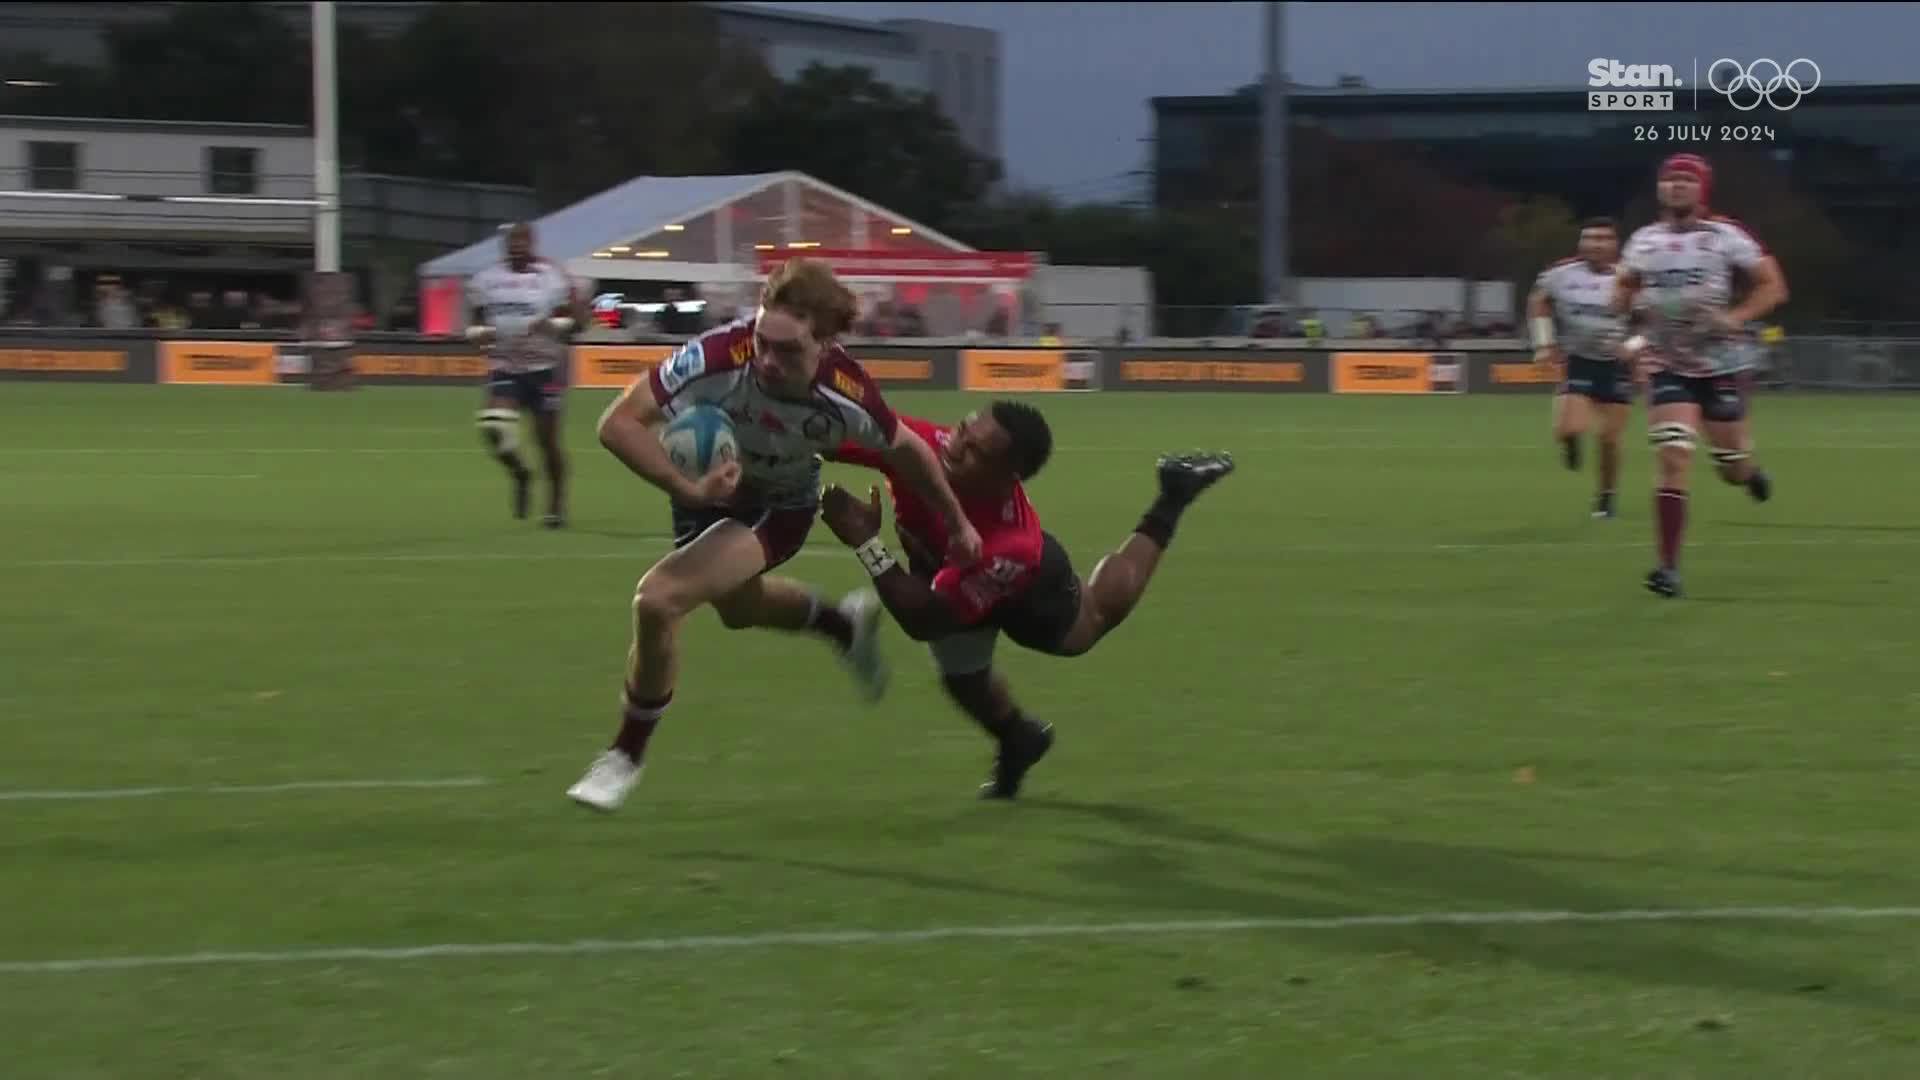 Tim Ryan, the 'Junkyard Dog' on his way to his fourth career try for the Reds against the Crusaders.